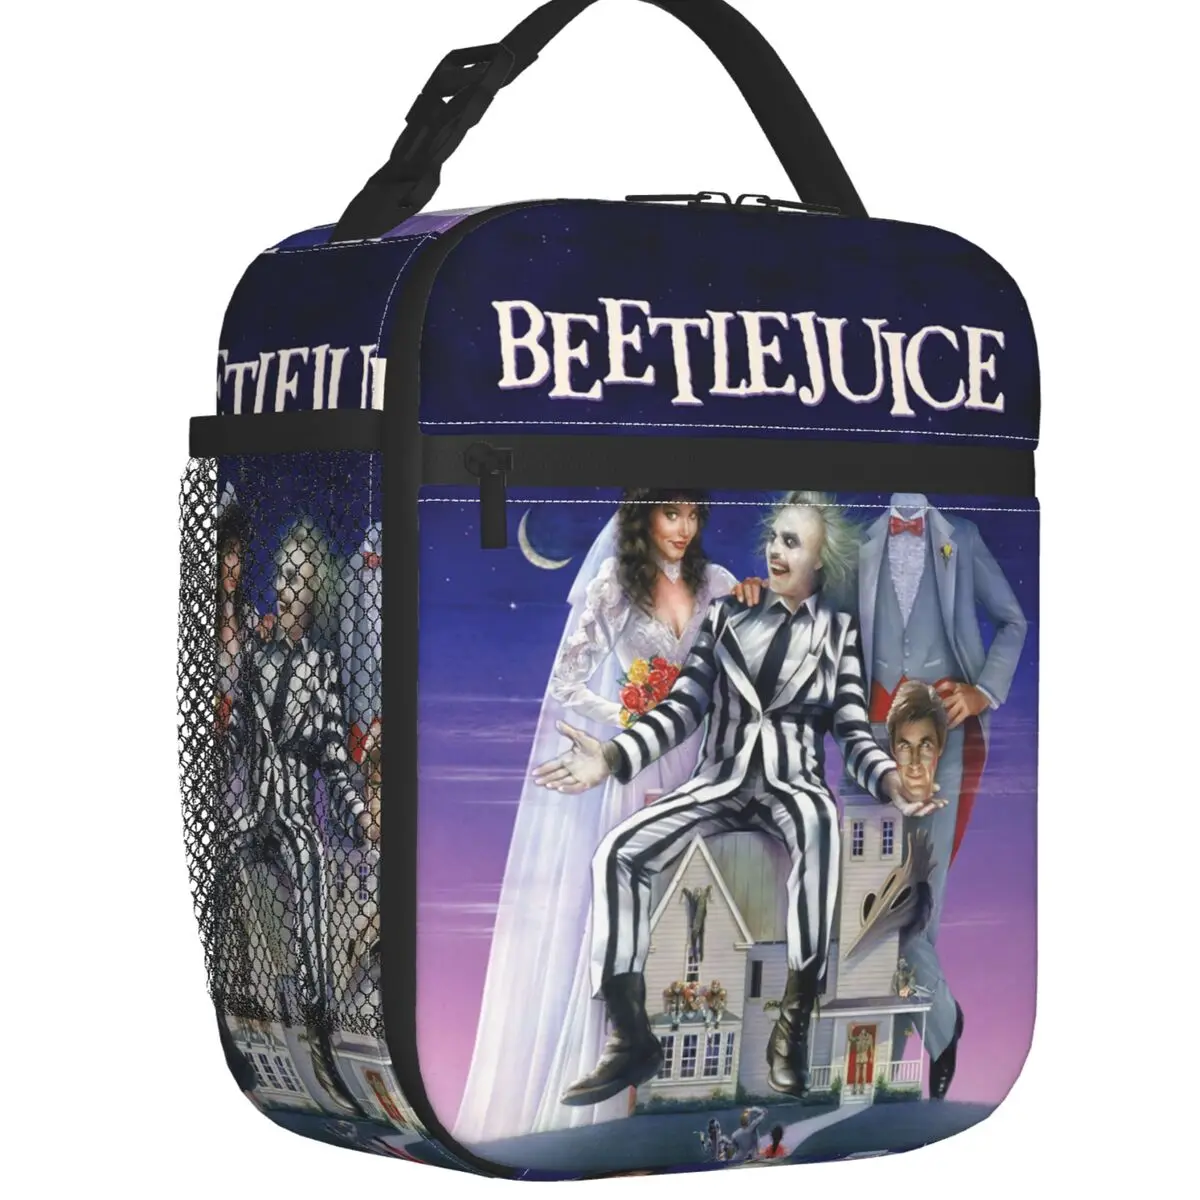 Tim Burton Beetlejuice Horror Film Insulated Lunch Bags for Outdoor Picnic Portable Cooler Thermal Lunch Box Women Children